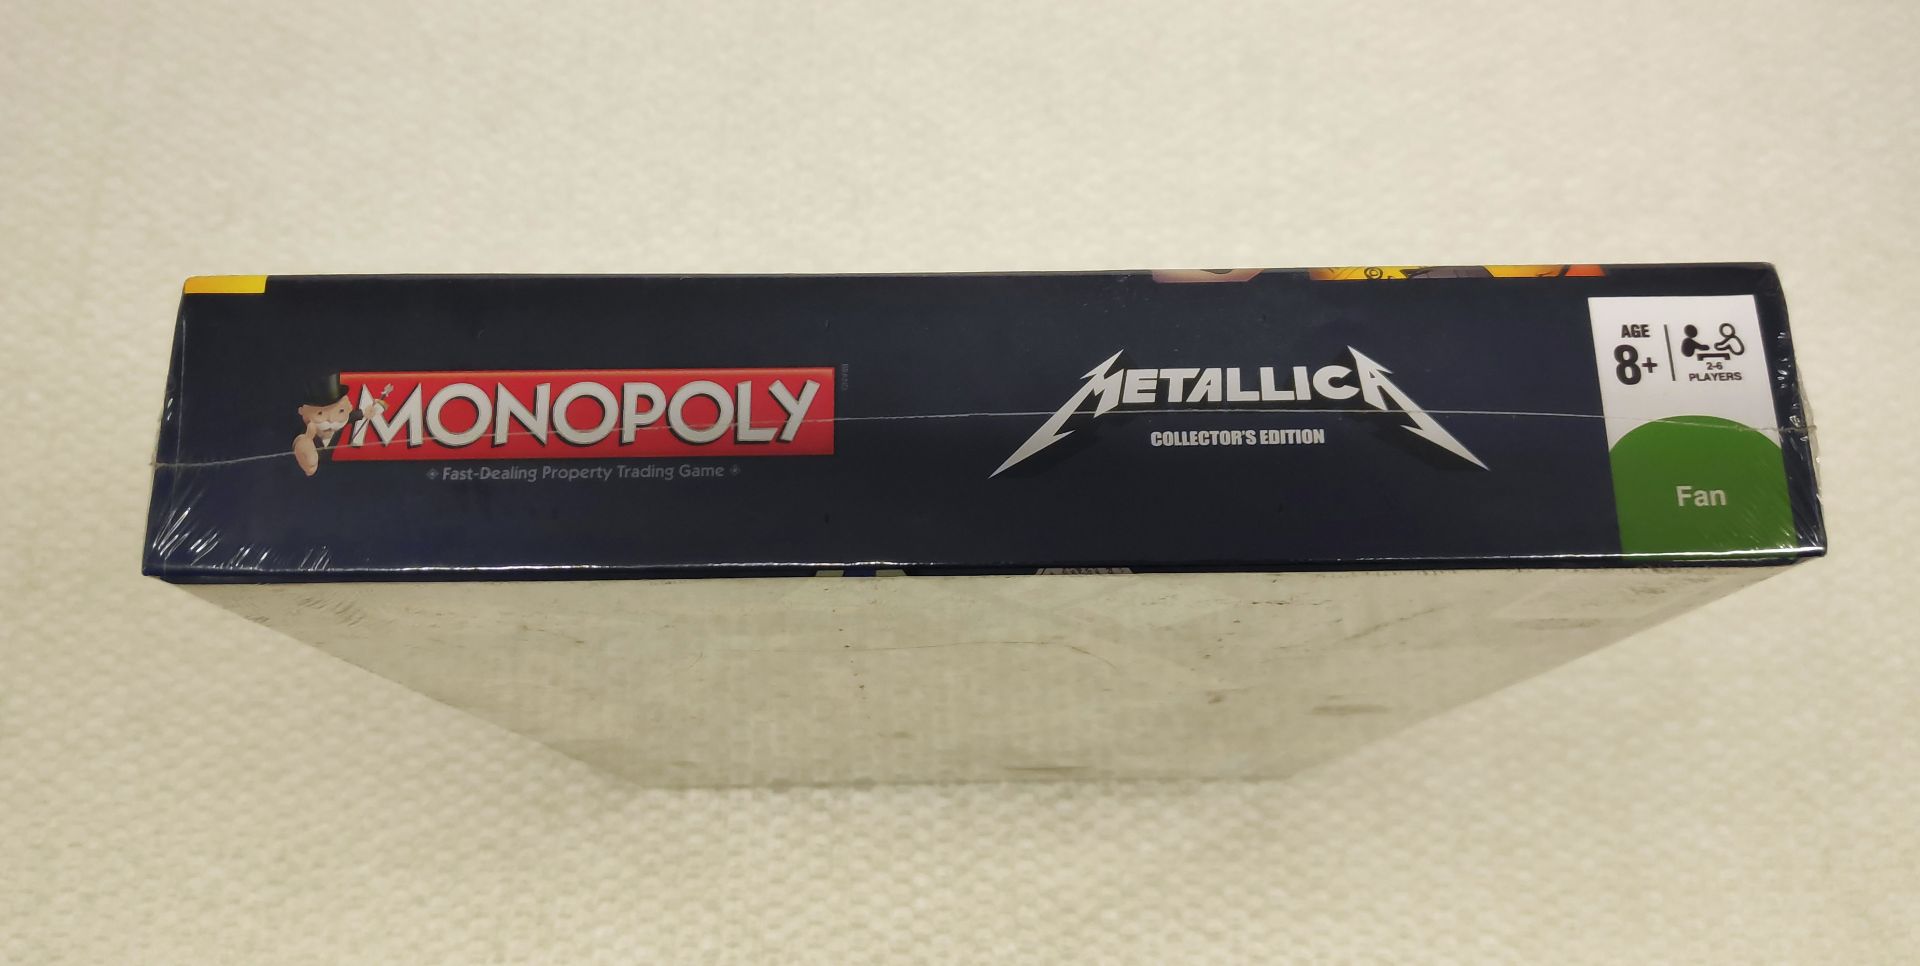 1 x Metallica Collector's Edition Monopoly - New/Sealed - Image 3 of 8